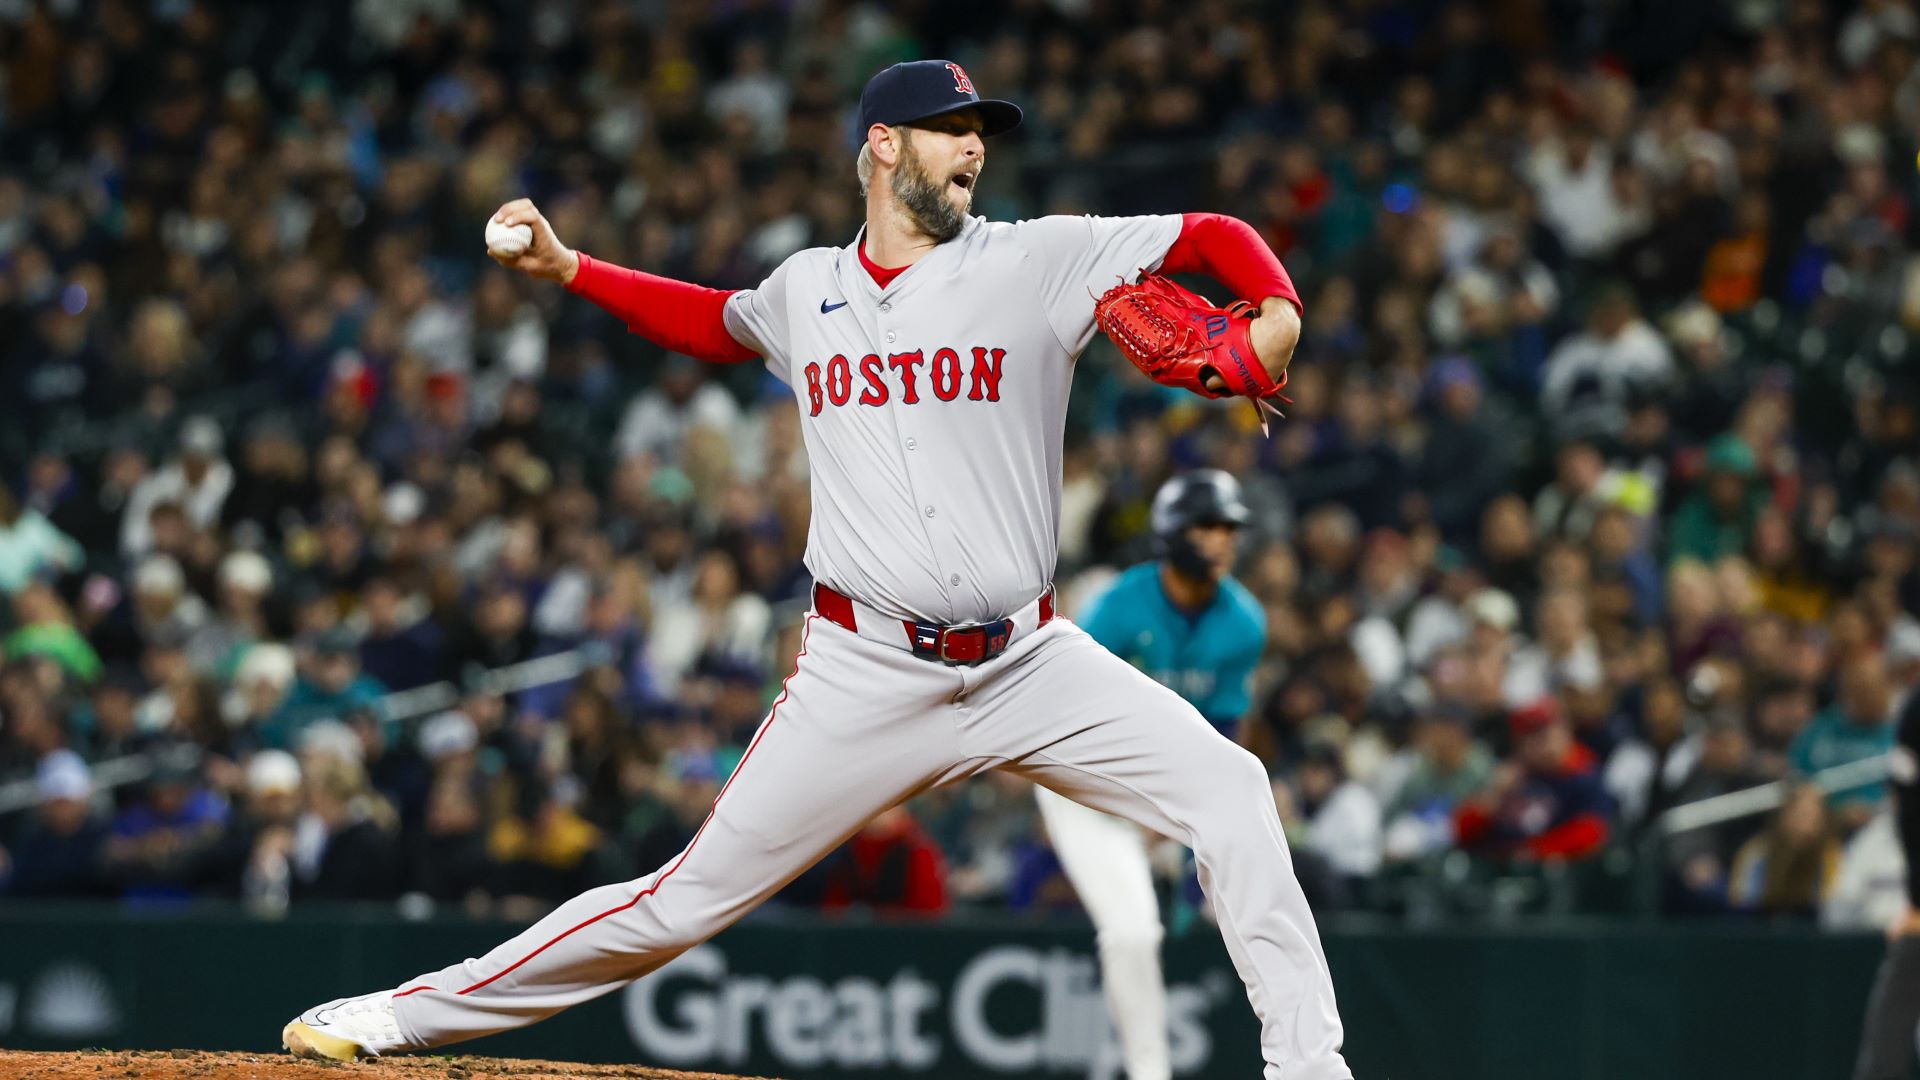 Injury To Red Sox Reliever Kept Him From Pitching Vs. Angels [Video]